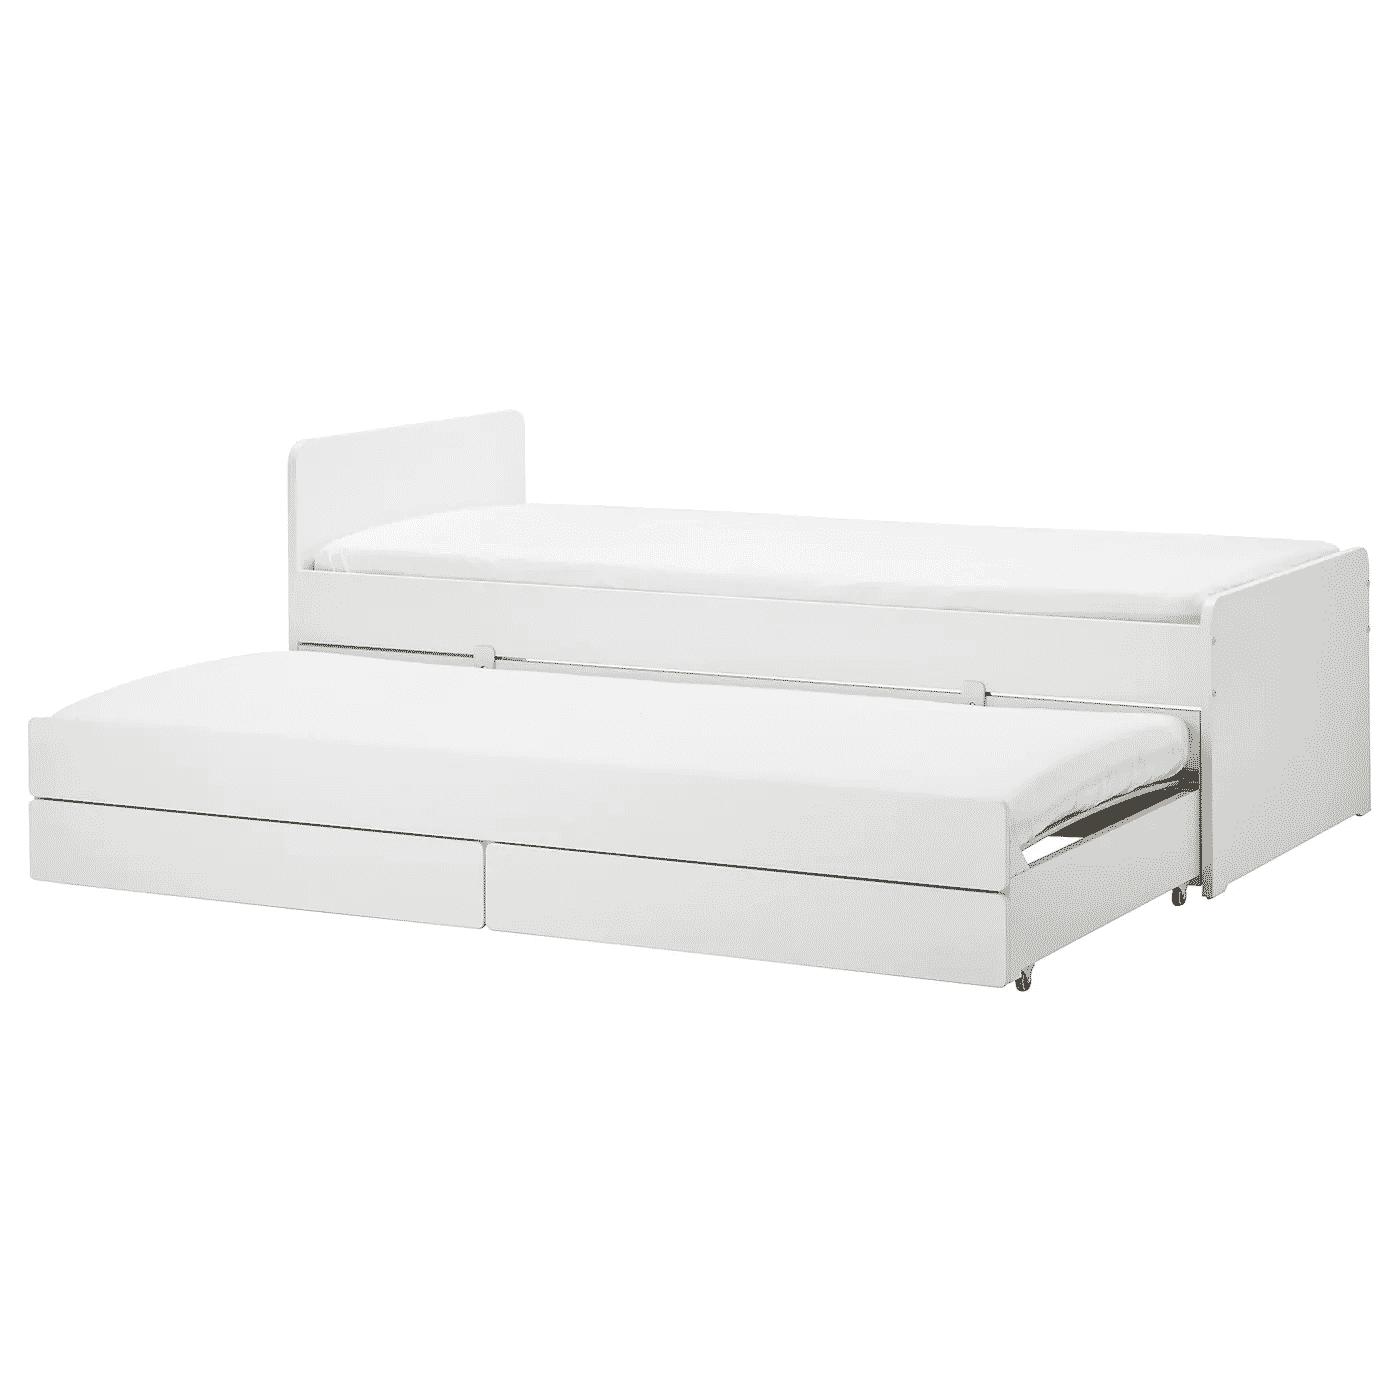 Best Ikea Twin Bed With Storage Review, Ikea Long Twin Bed